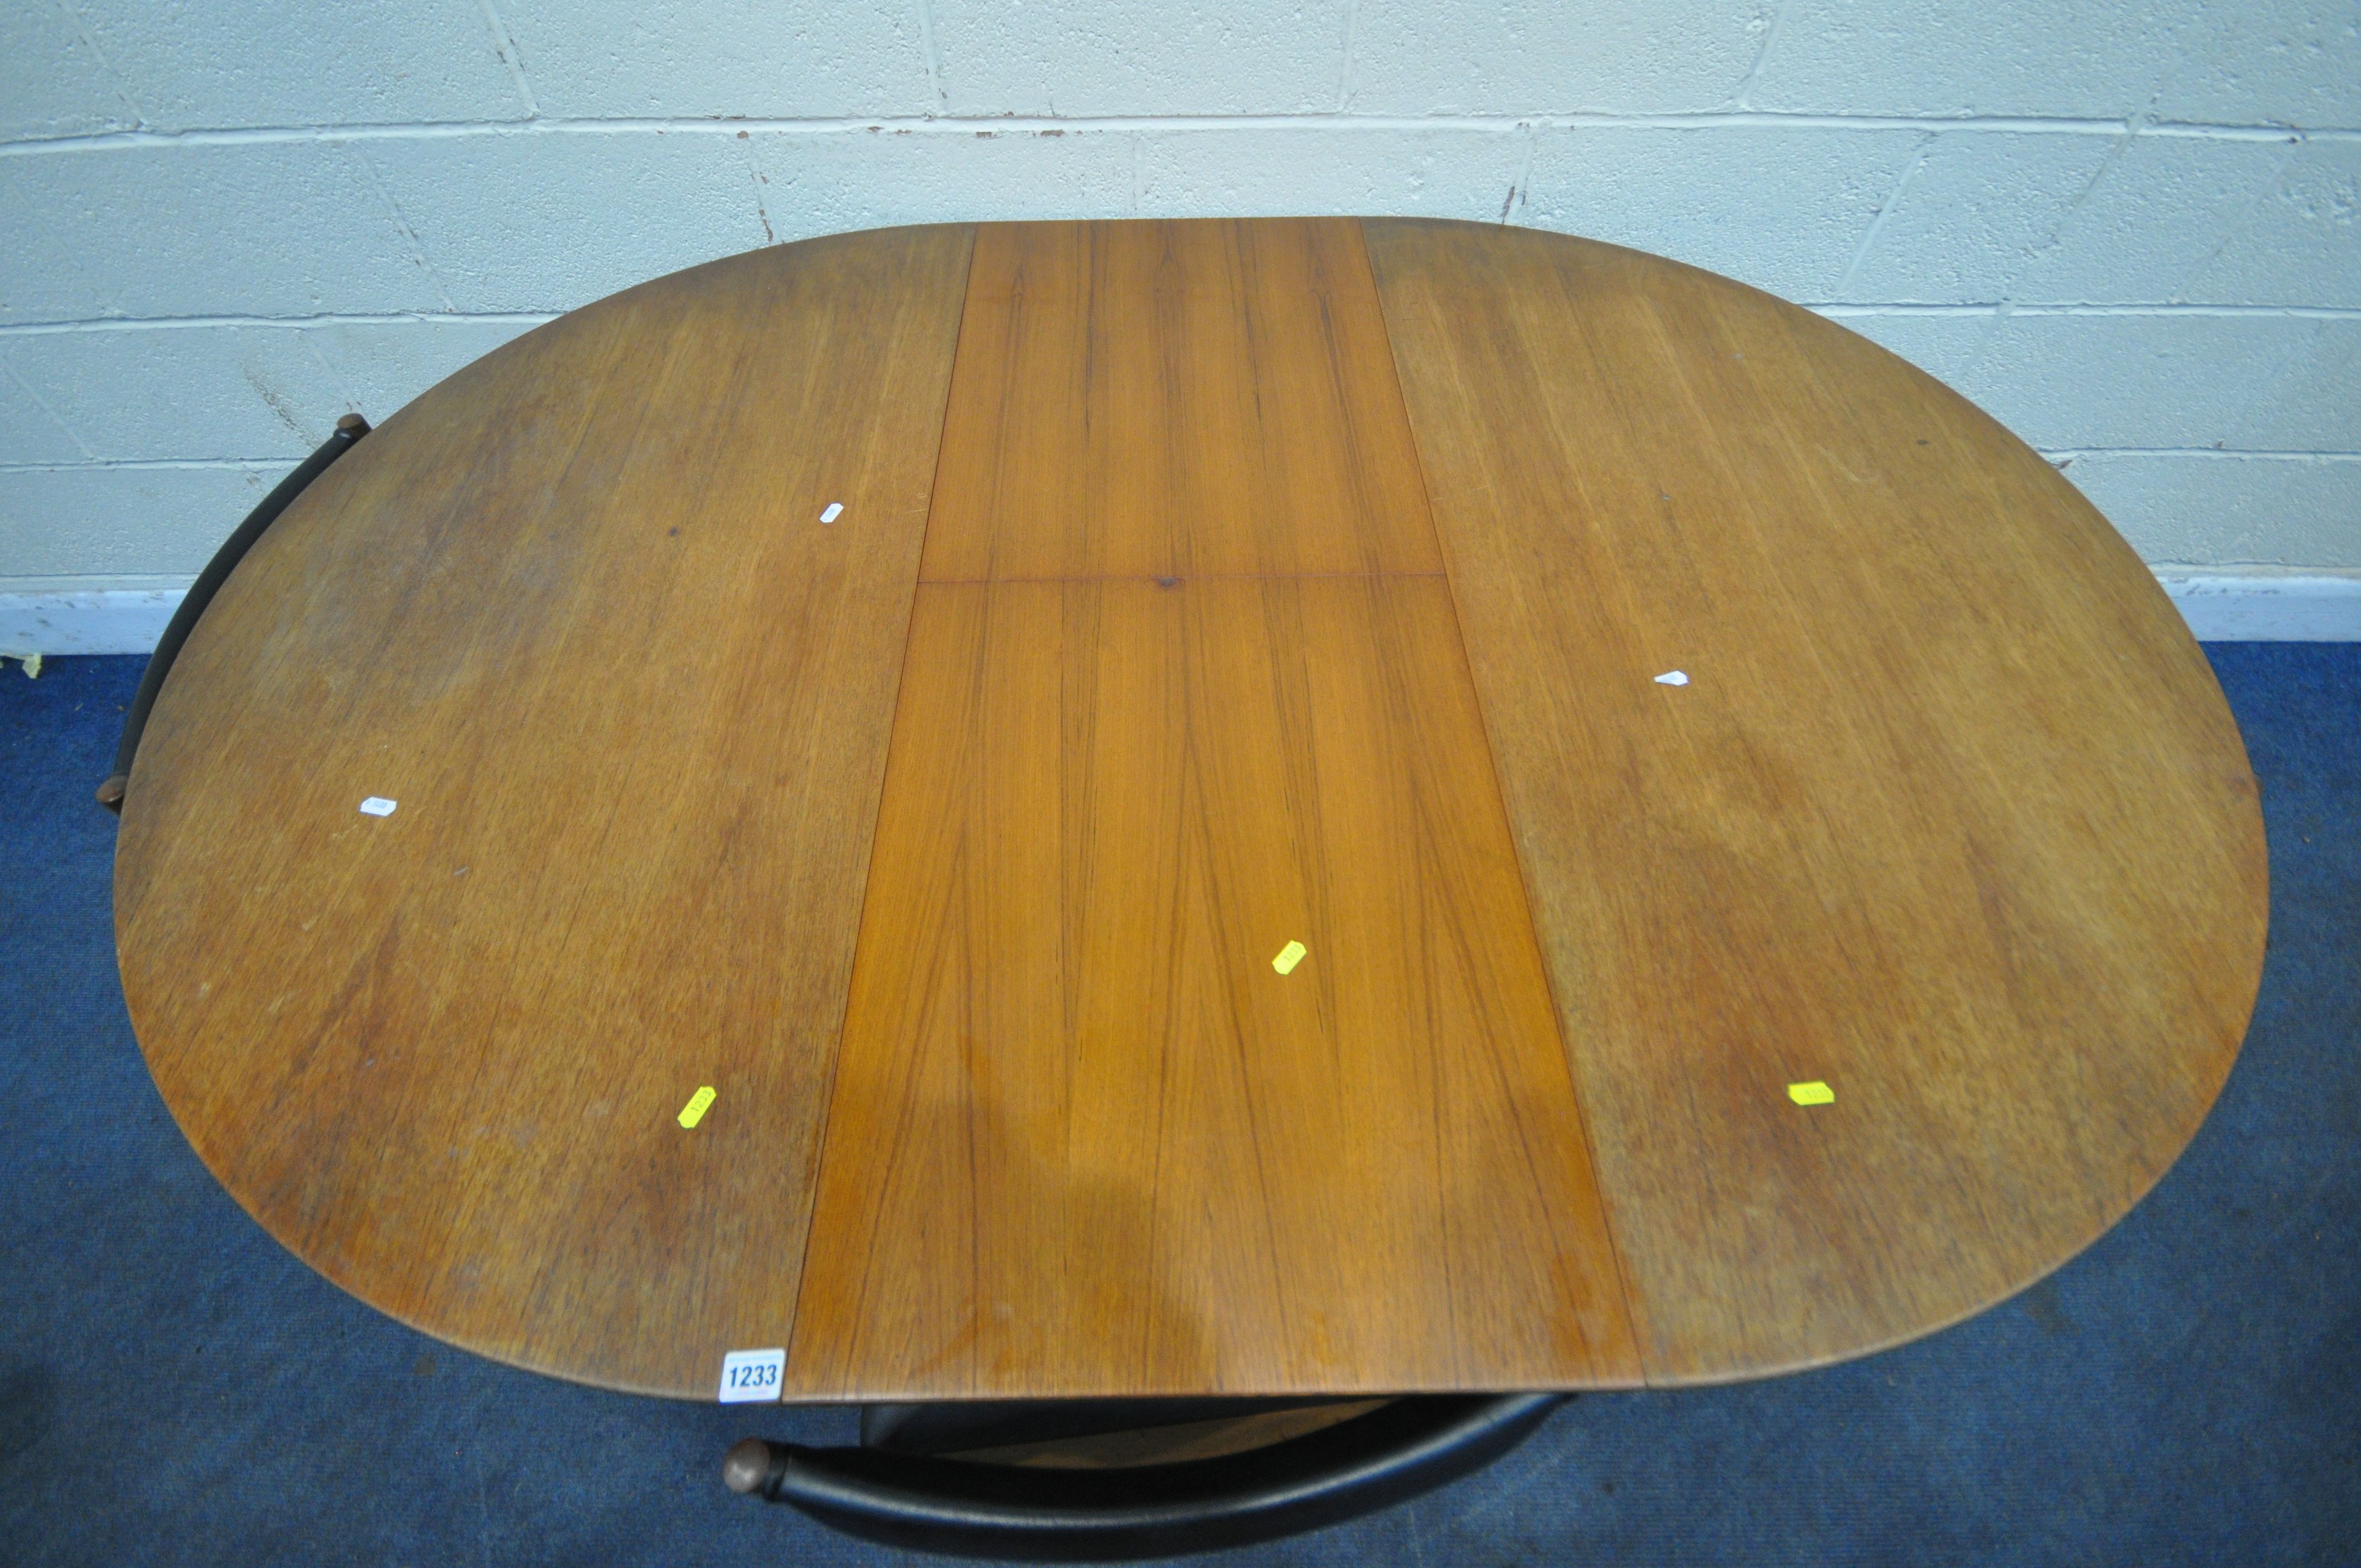 A.H. MCINTOSH AND CO LTD, KIRKCALDY, SCOTLAND, A MID CENTURY TEAK EXTENDING DINING TABLE, with a - Image 4 of 7